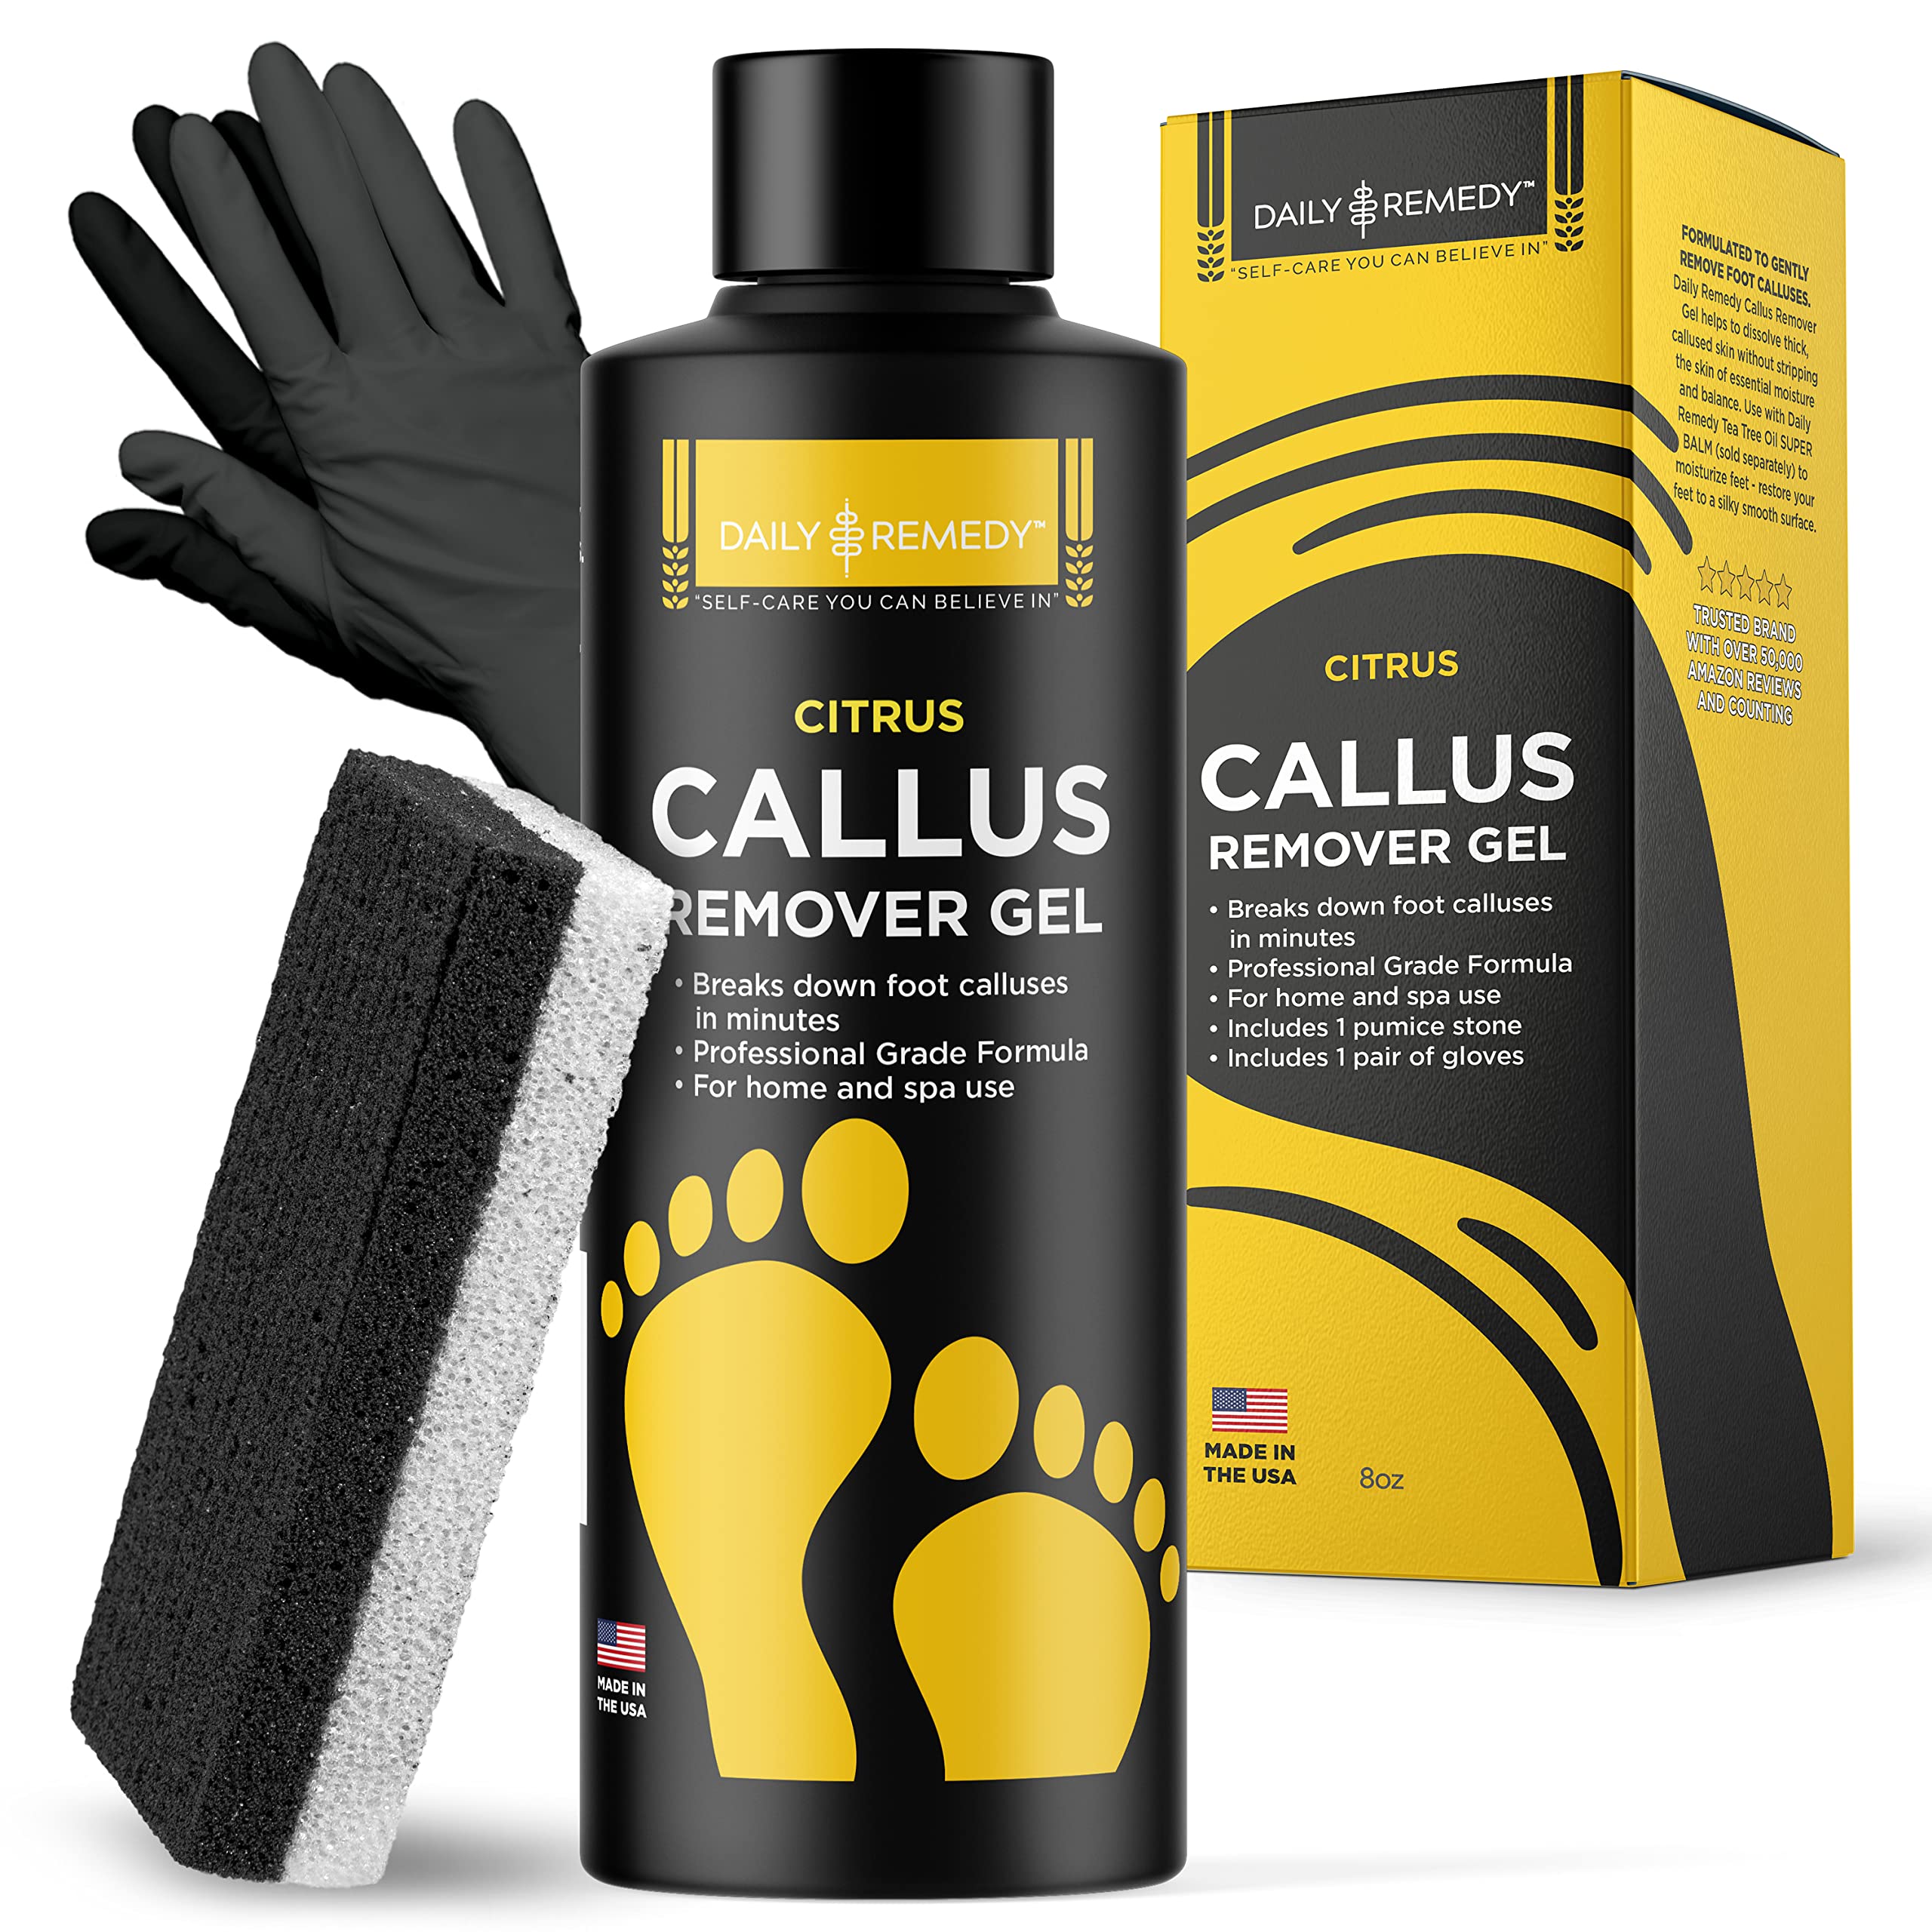  DeEnti Callus Remover Gel, Extra Strength Foot Callus Remover,  8oz Salon Grade Home Pedicure Supplies for Rough, Dry, Cracked Skin, Heavy  Duty Callus Remover for Feet, Lemon : Health 